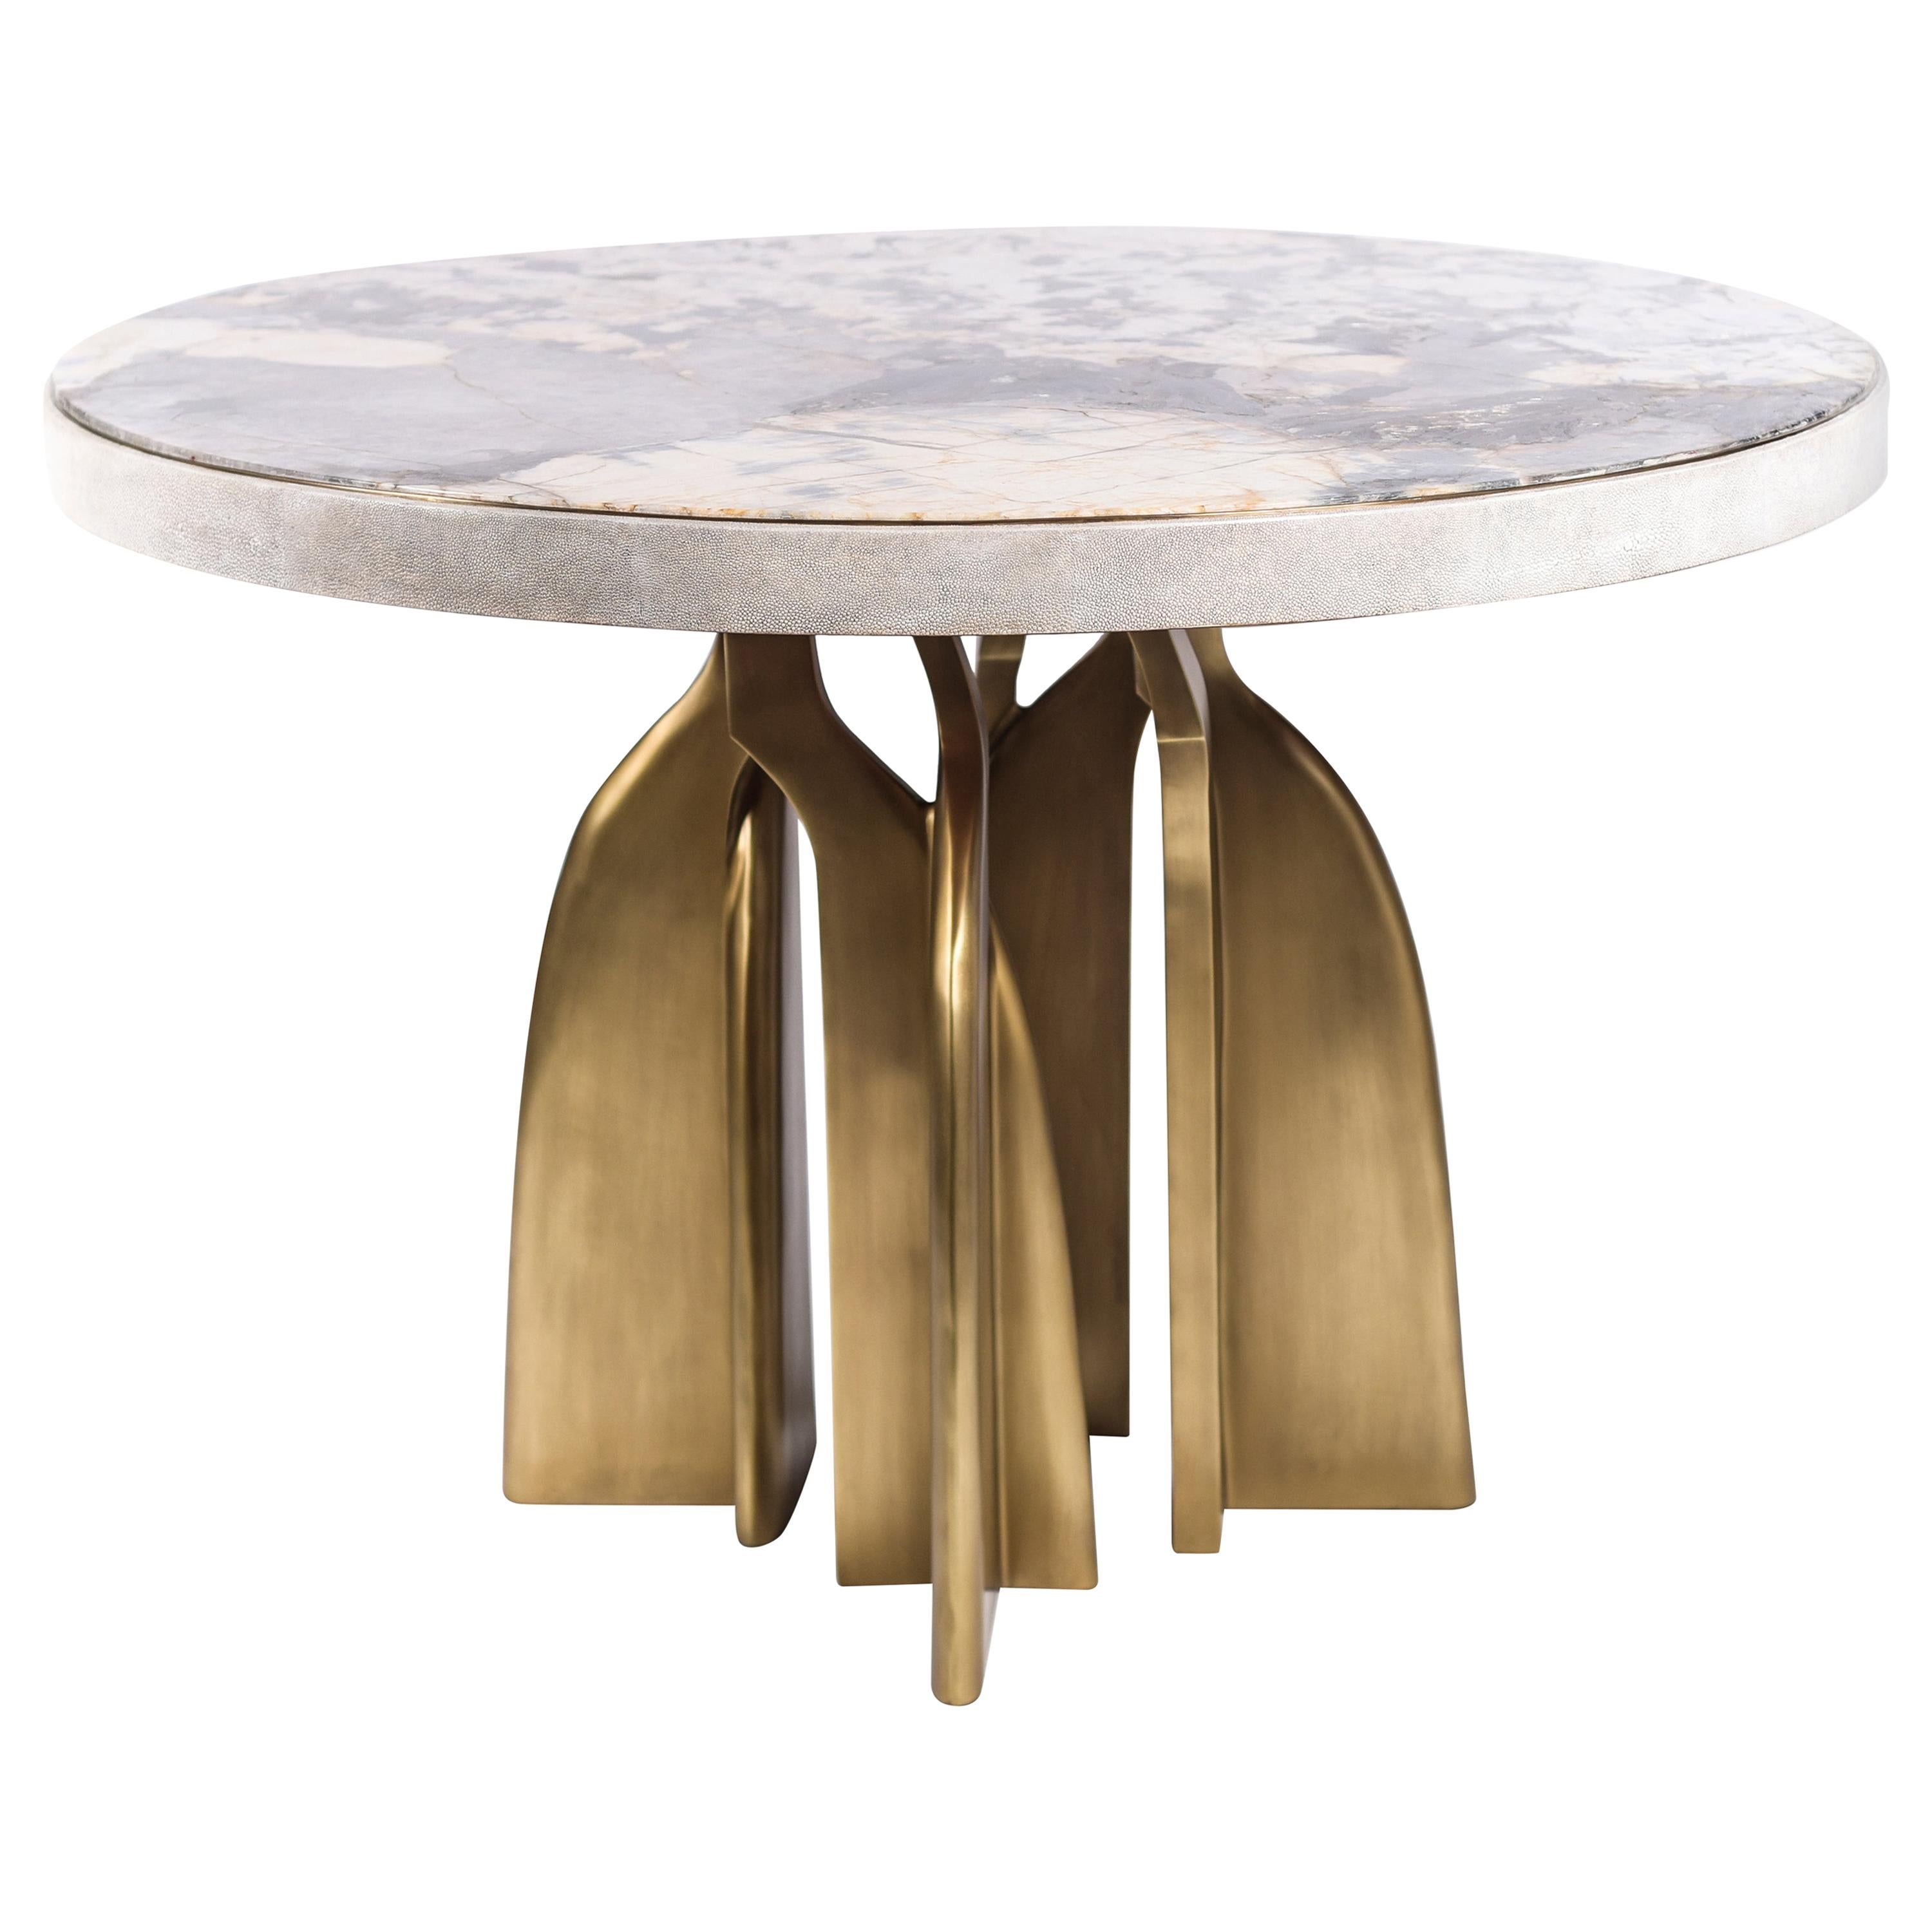 The Chital breakfast table is a stunning piece, a statement in any space. The Patagonia stone inlaid top is stunning and one of a kind. The semi-precious stone has beautiful color tonalities and silver inserts. The side border of the top is inlaid